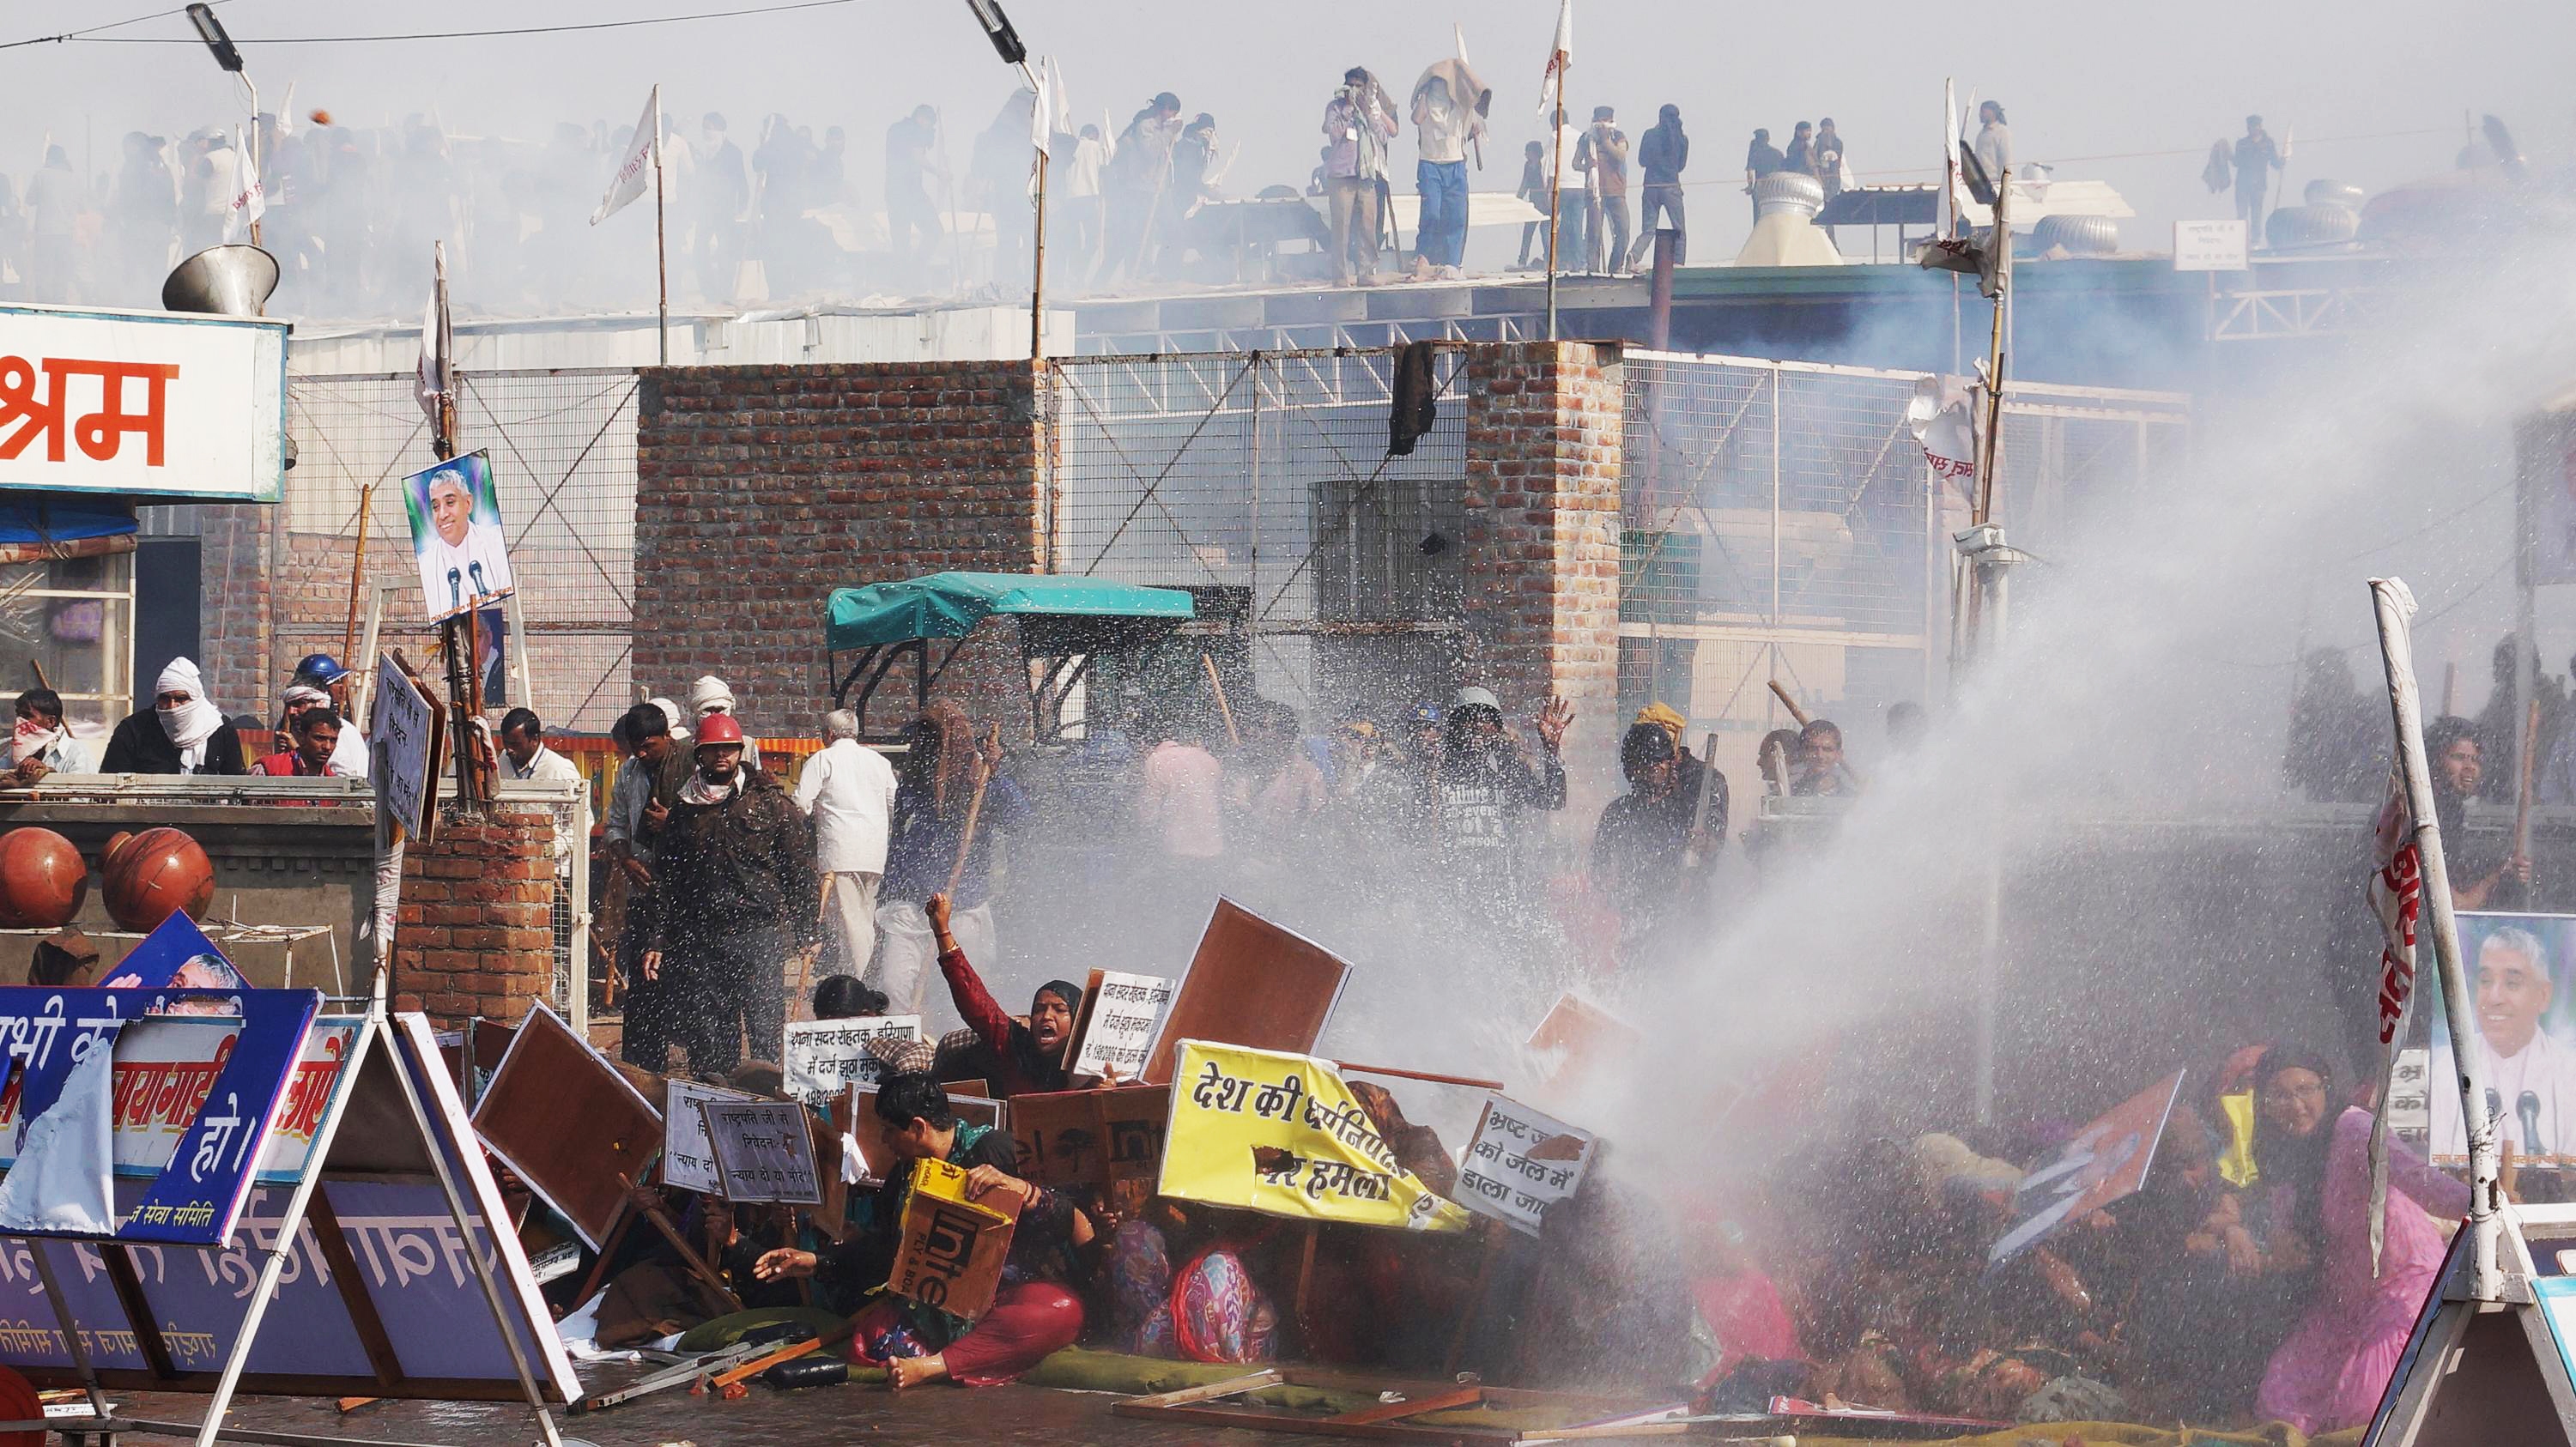 Supporters try to resist police water cannon as police storm the ashram of controversial Indian guru Sant Rampal, in search of him at Hisar in Haryana state, India, Tuesday, Nov.18, 2014. (Bansilal Basniwal—AP)